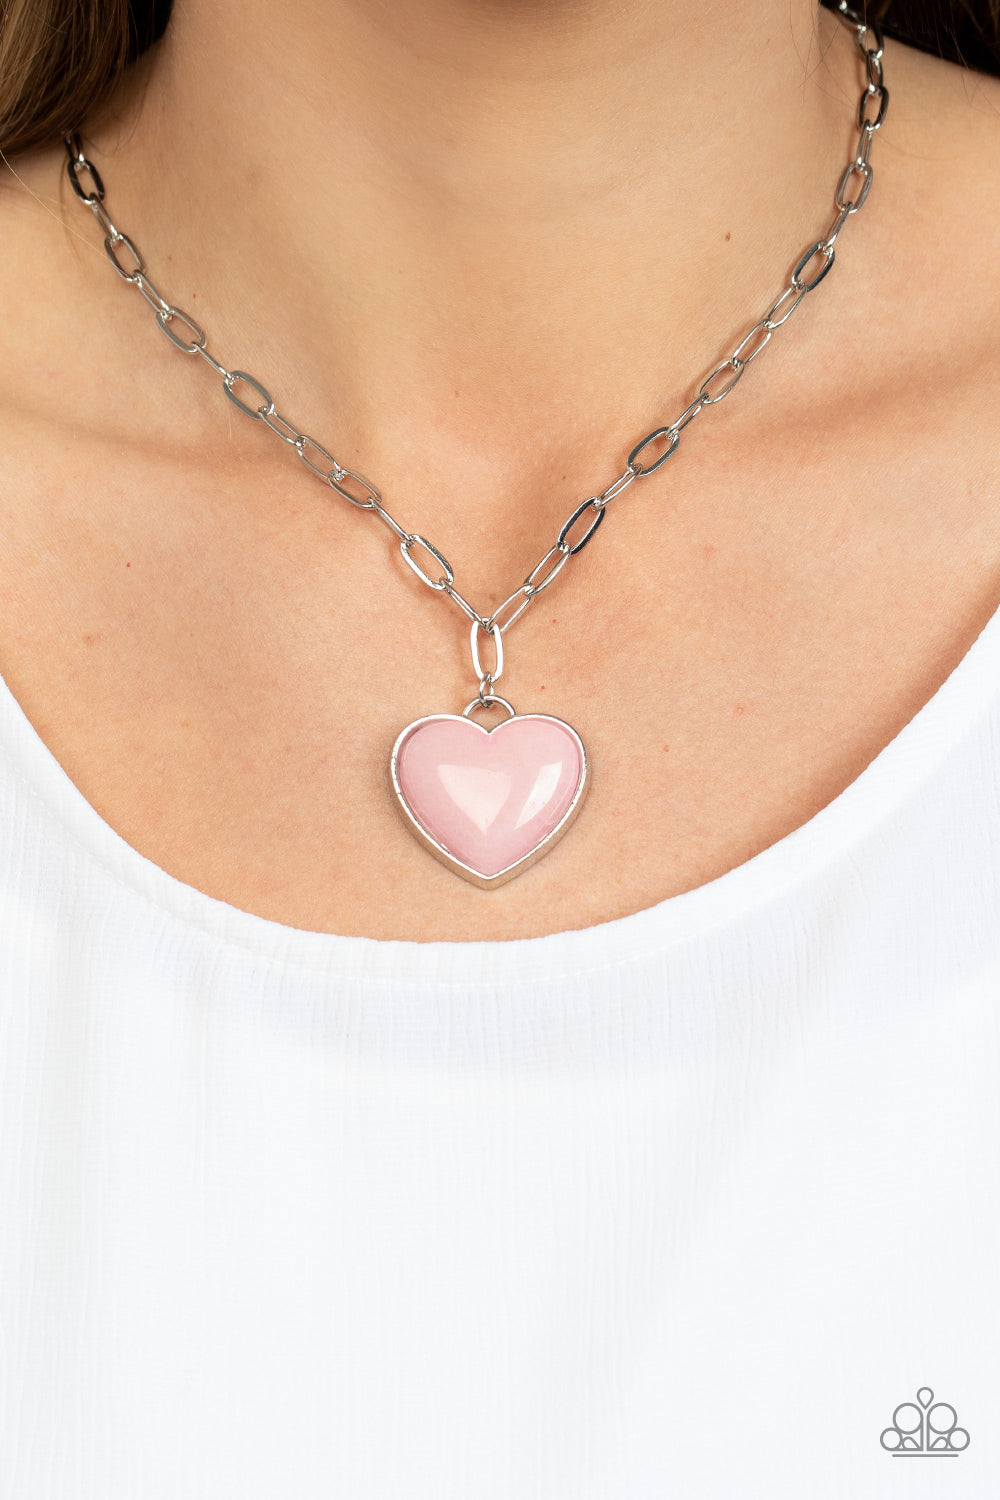 Everlasting Endearment - Pink Heart Necklace Paparazzi Accessories